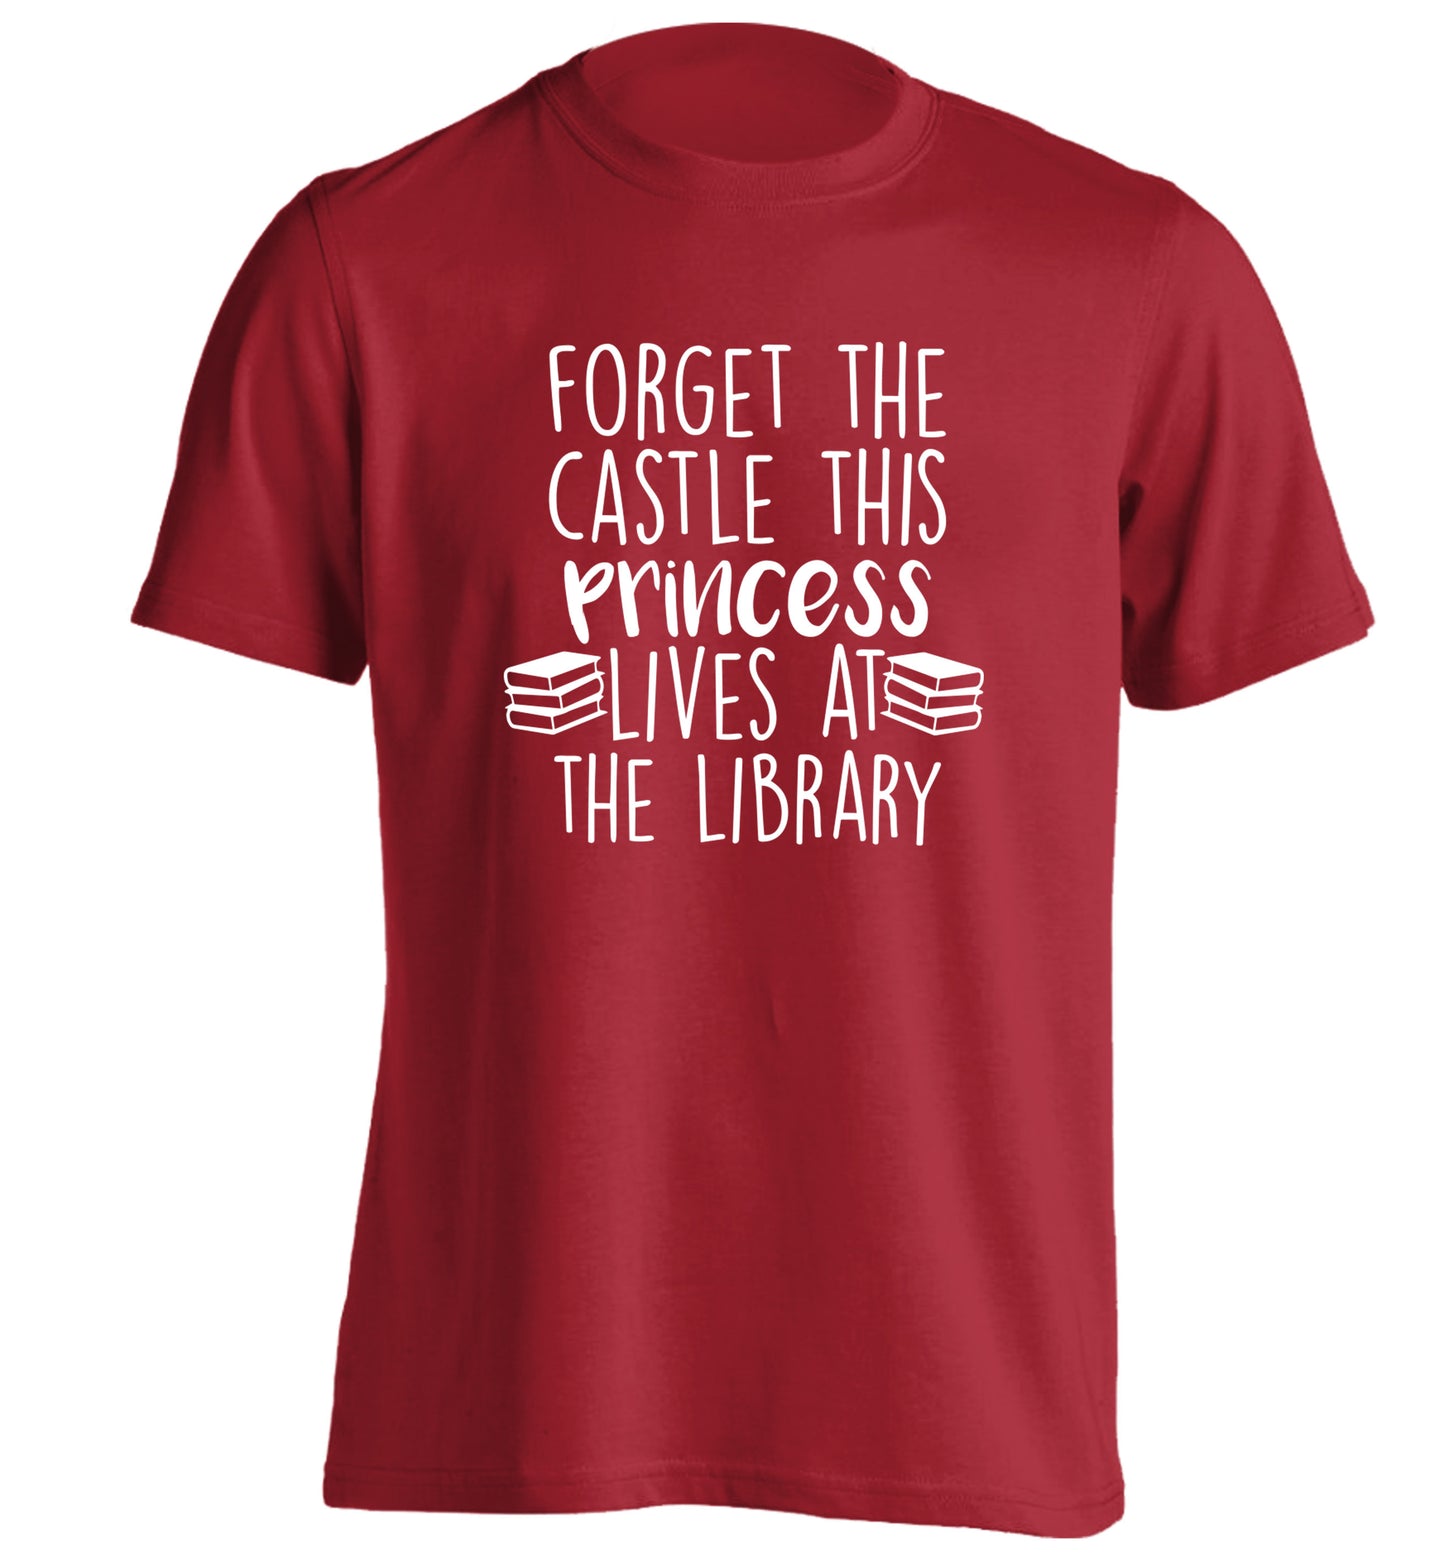 Forget the castle this princess lives at the library adults unisex red Tshirt 2XL